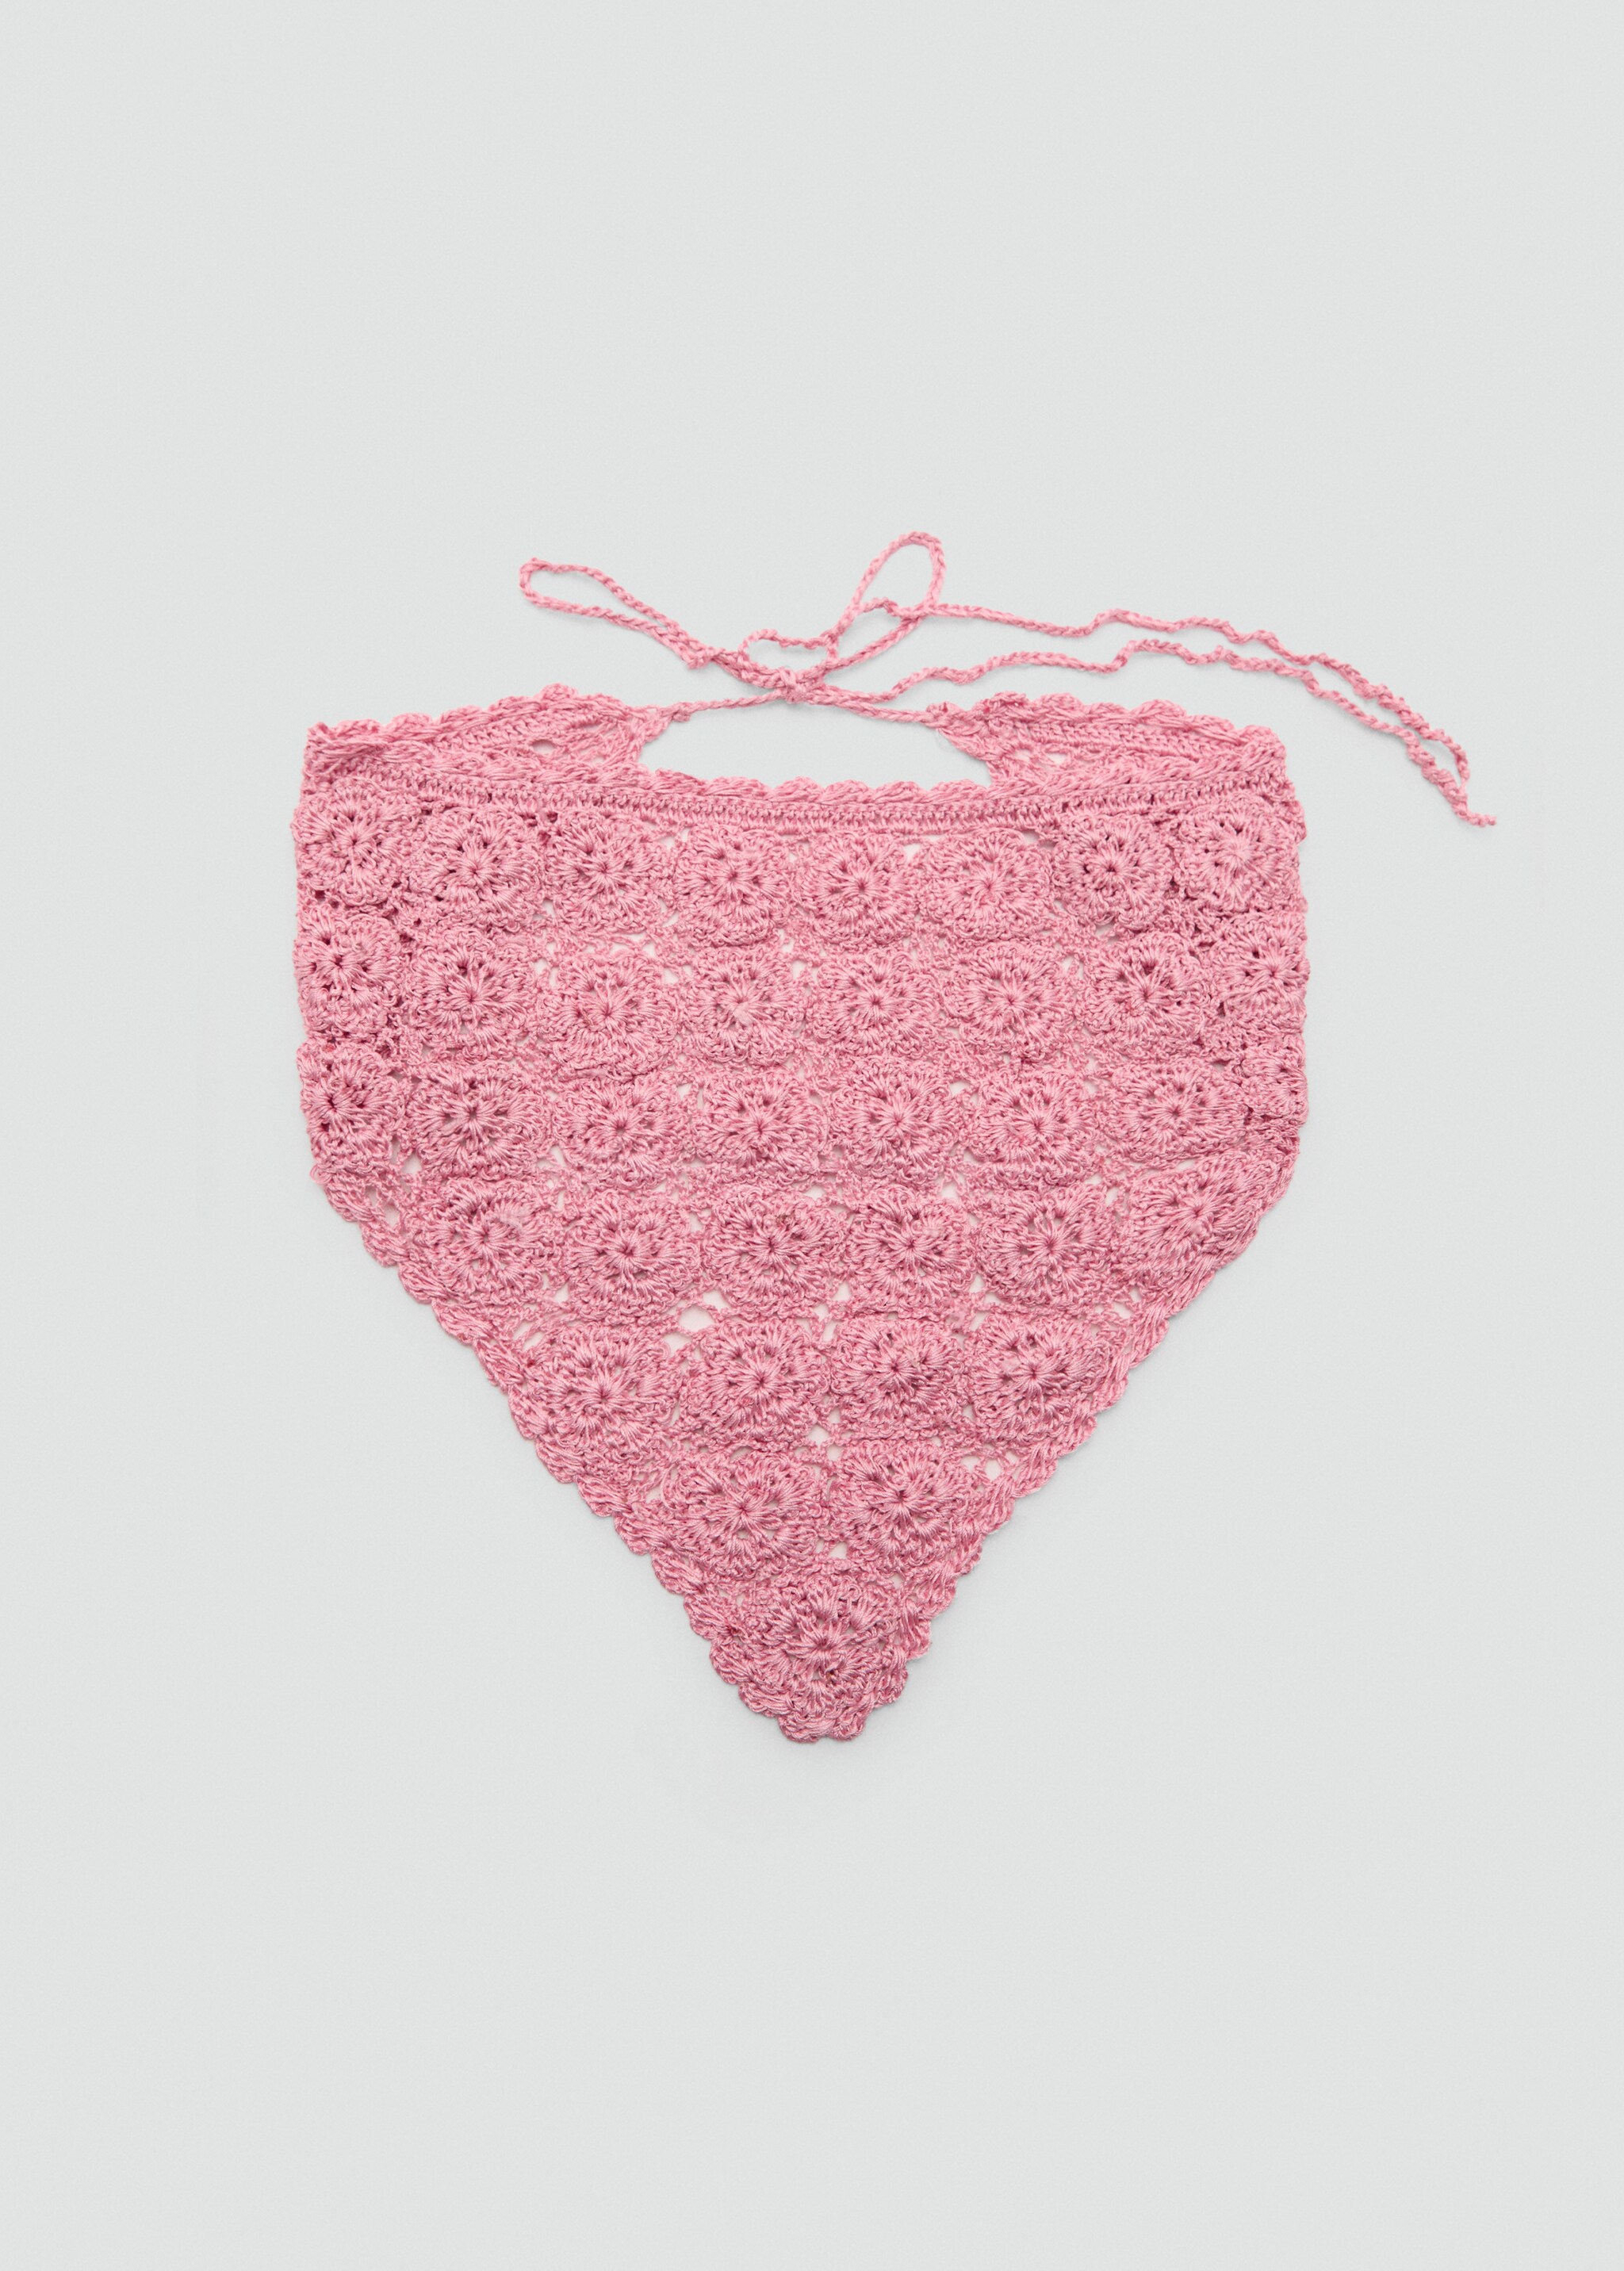 Crochet knit handkerchief - Article without model